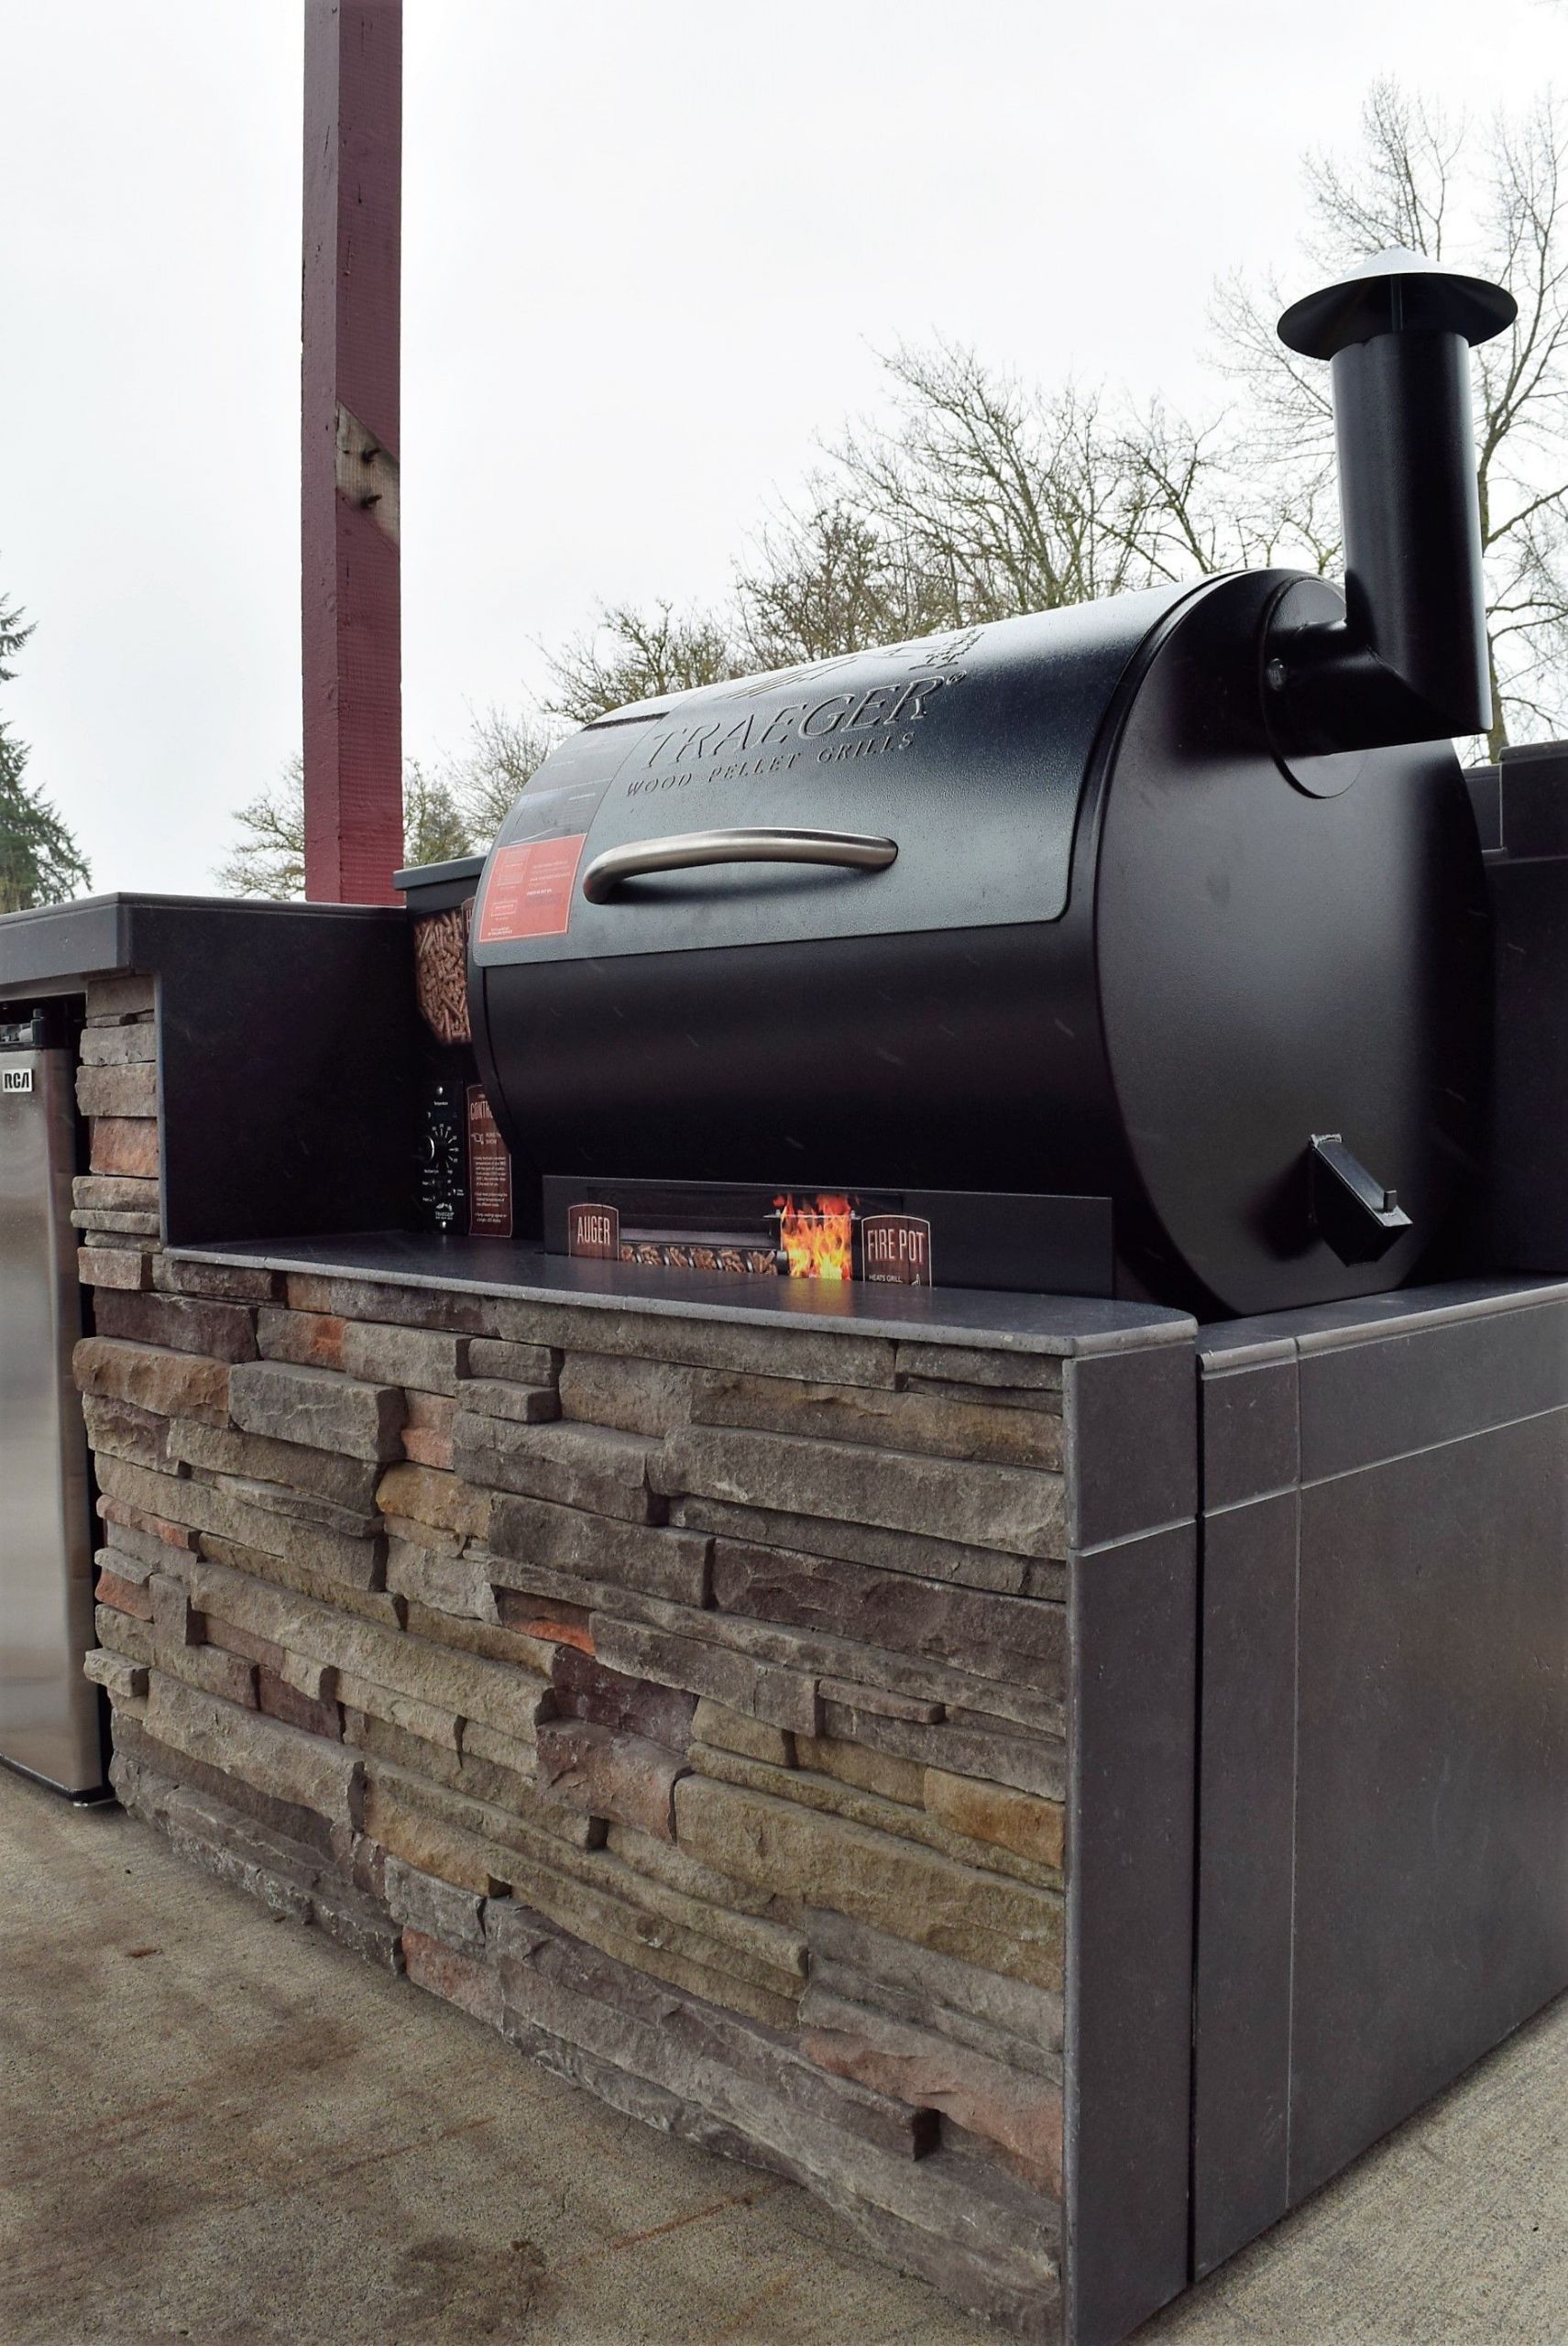 Traeger Built In Outdoor Kitchen
 Outdoor Kitchen pellet grilling with a Traeger Custom